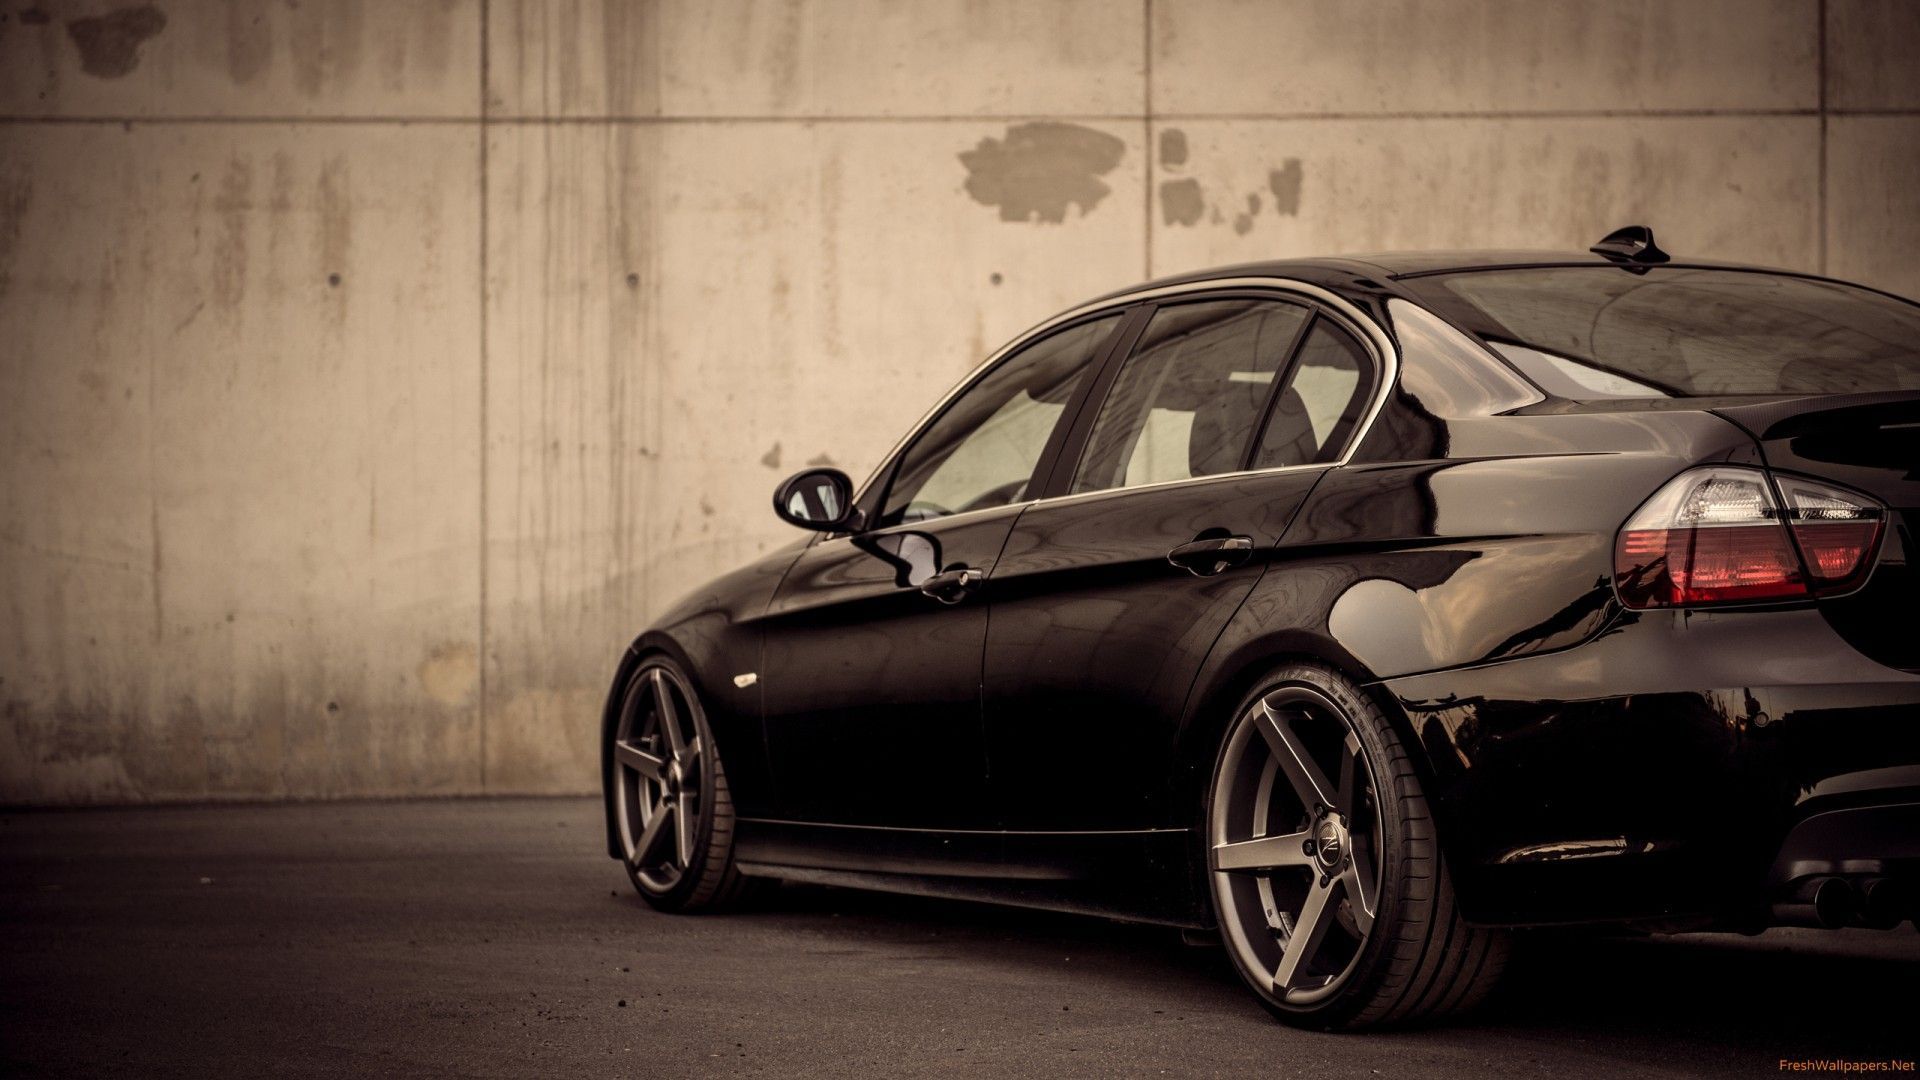 bmw e90 z performance wallpapers | Freshwallpapers